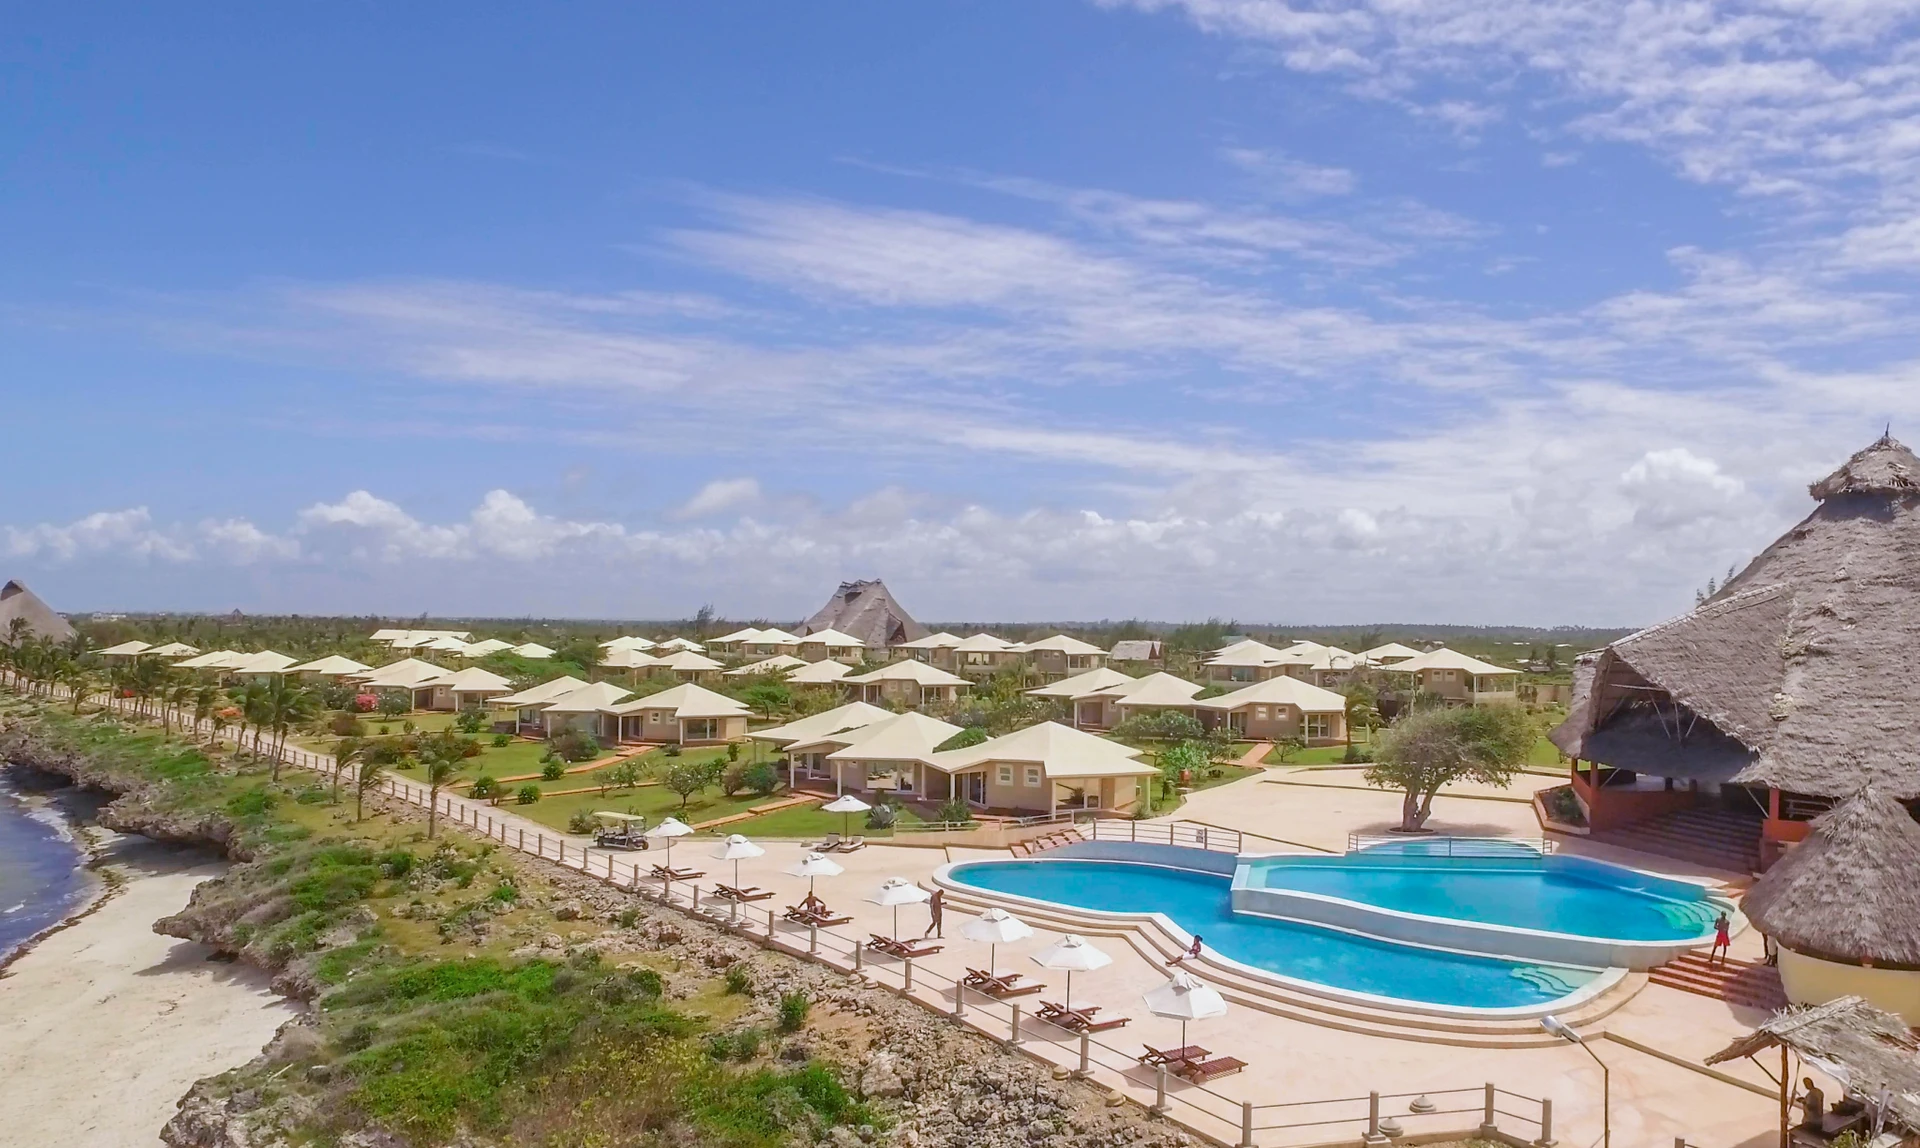 The One Watamu Bay Resort has over 150 residences which have spacious state-of the art rooms. 